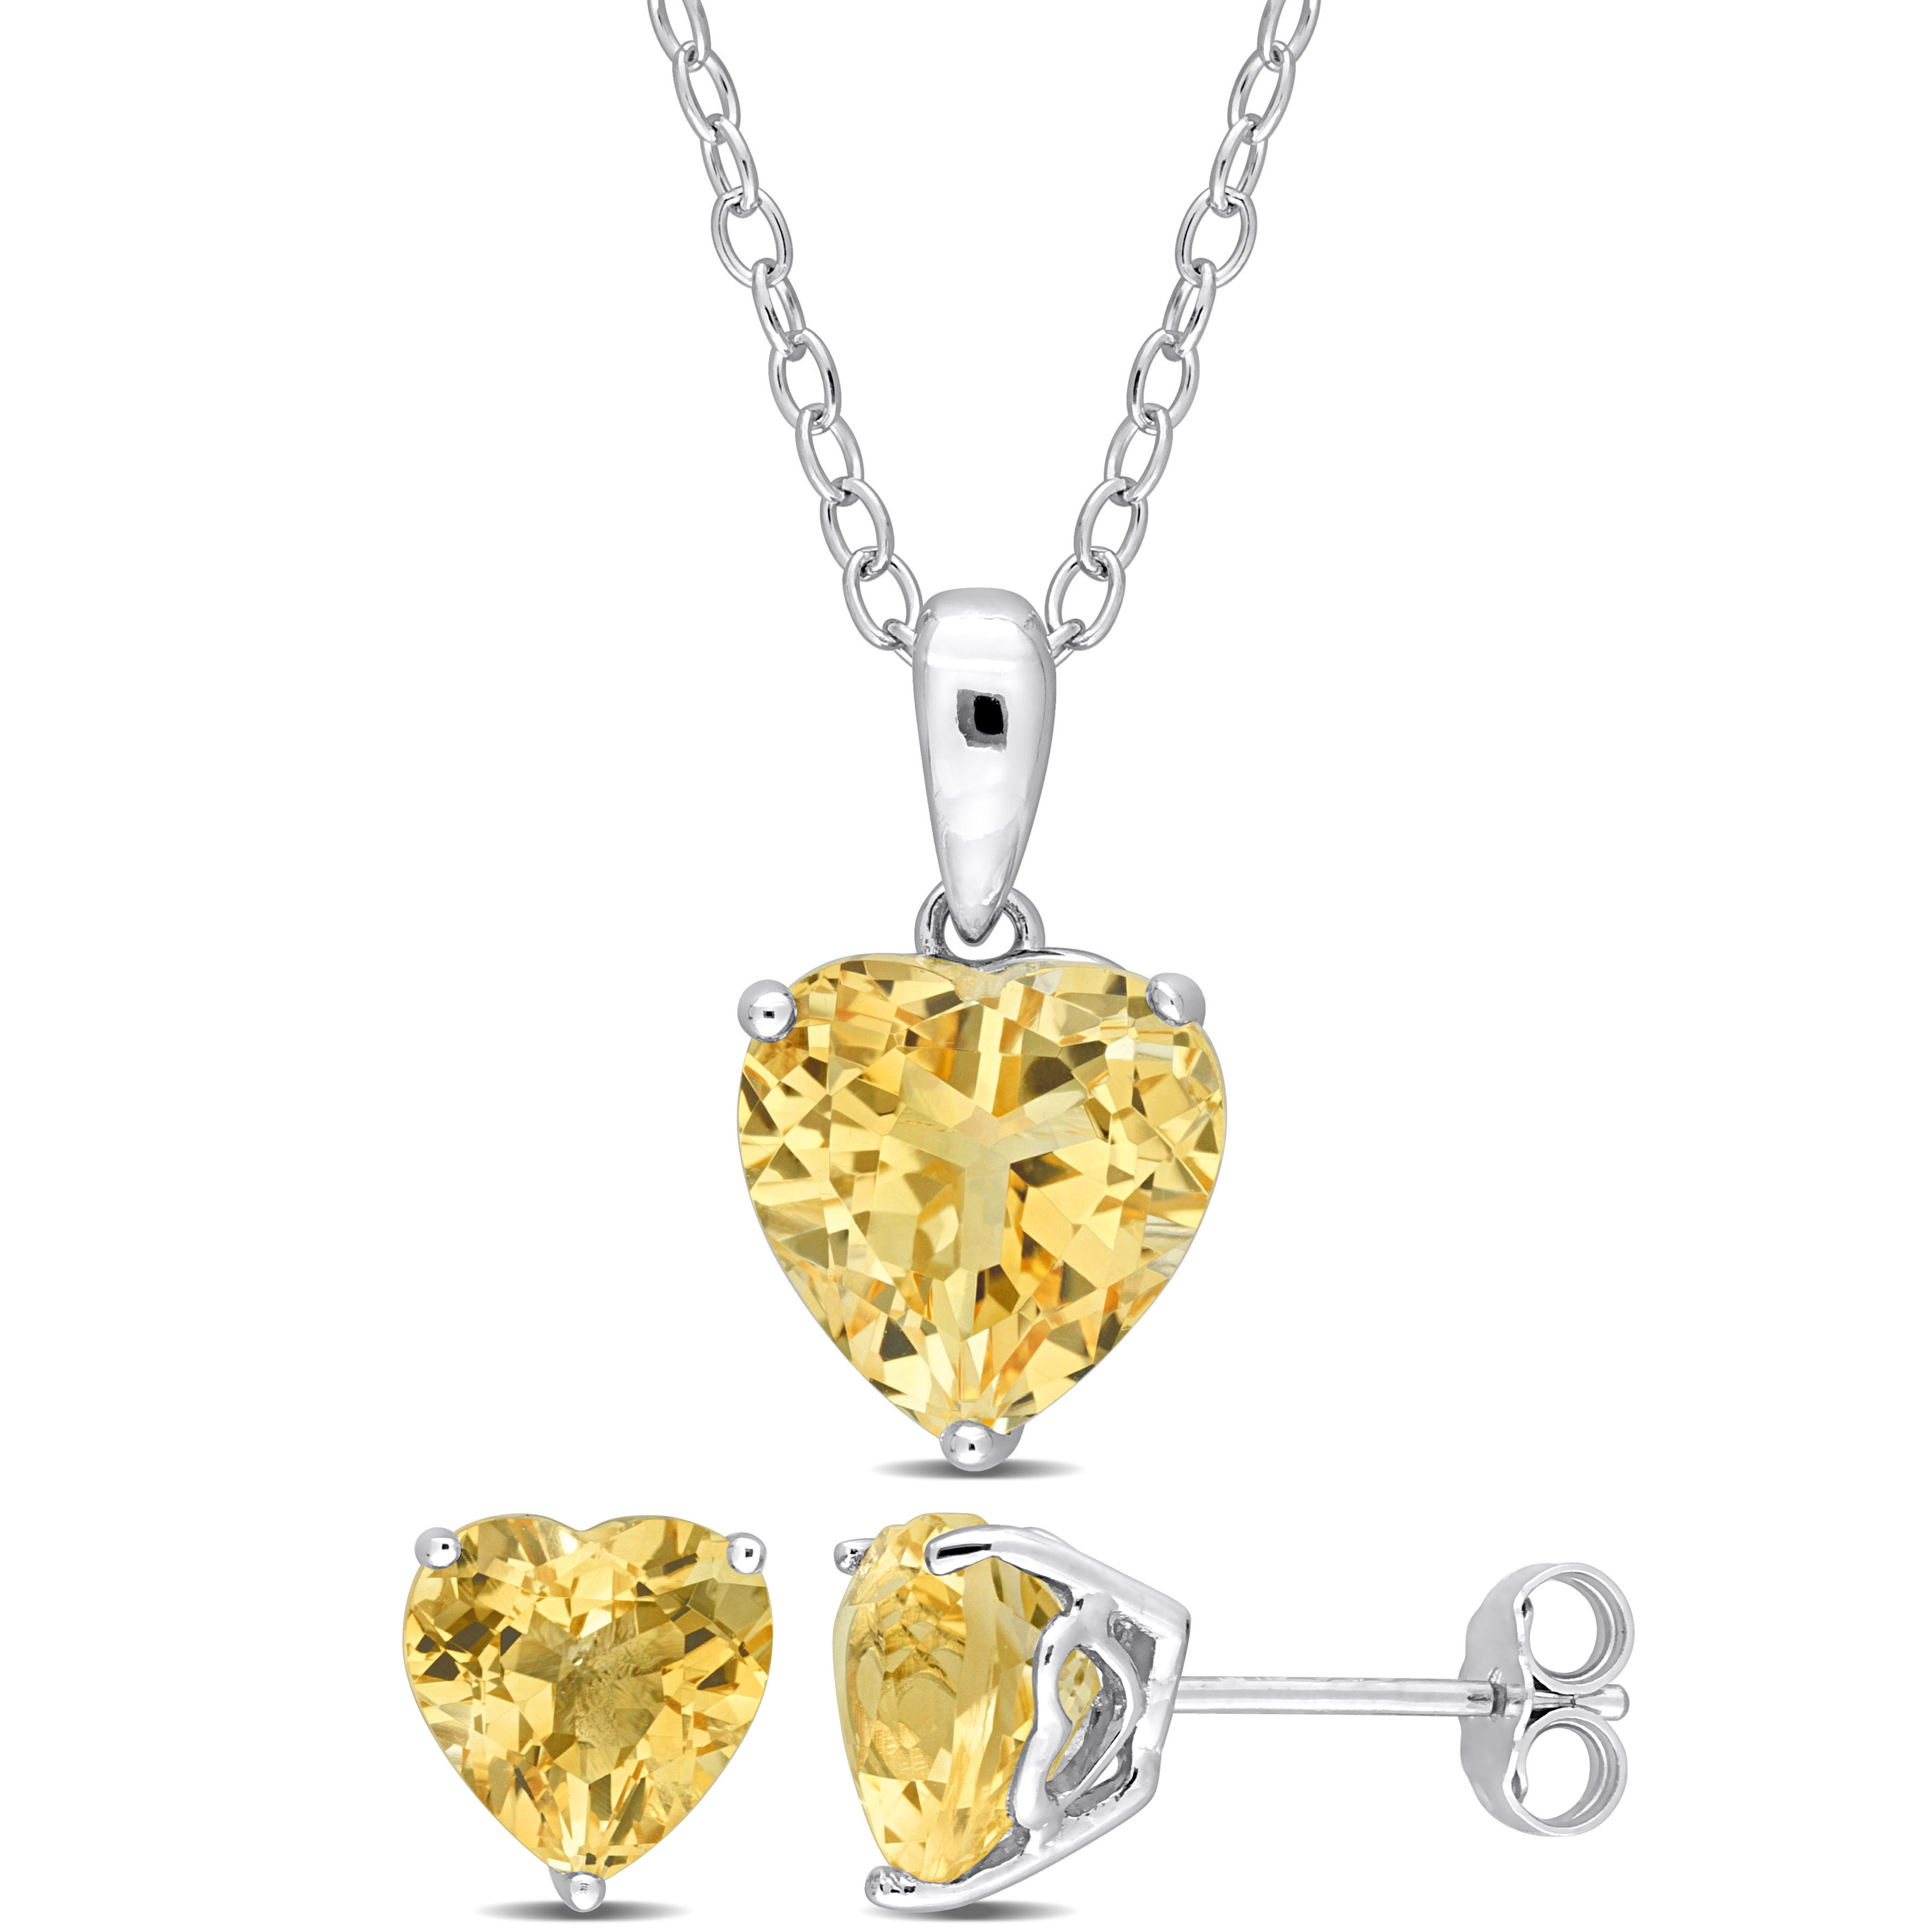 4 7/8 CT TGW Heart-Shape Citrine 2-Piece Set of Pendant with Chain and Earrings in Sterling Silver